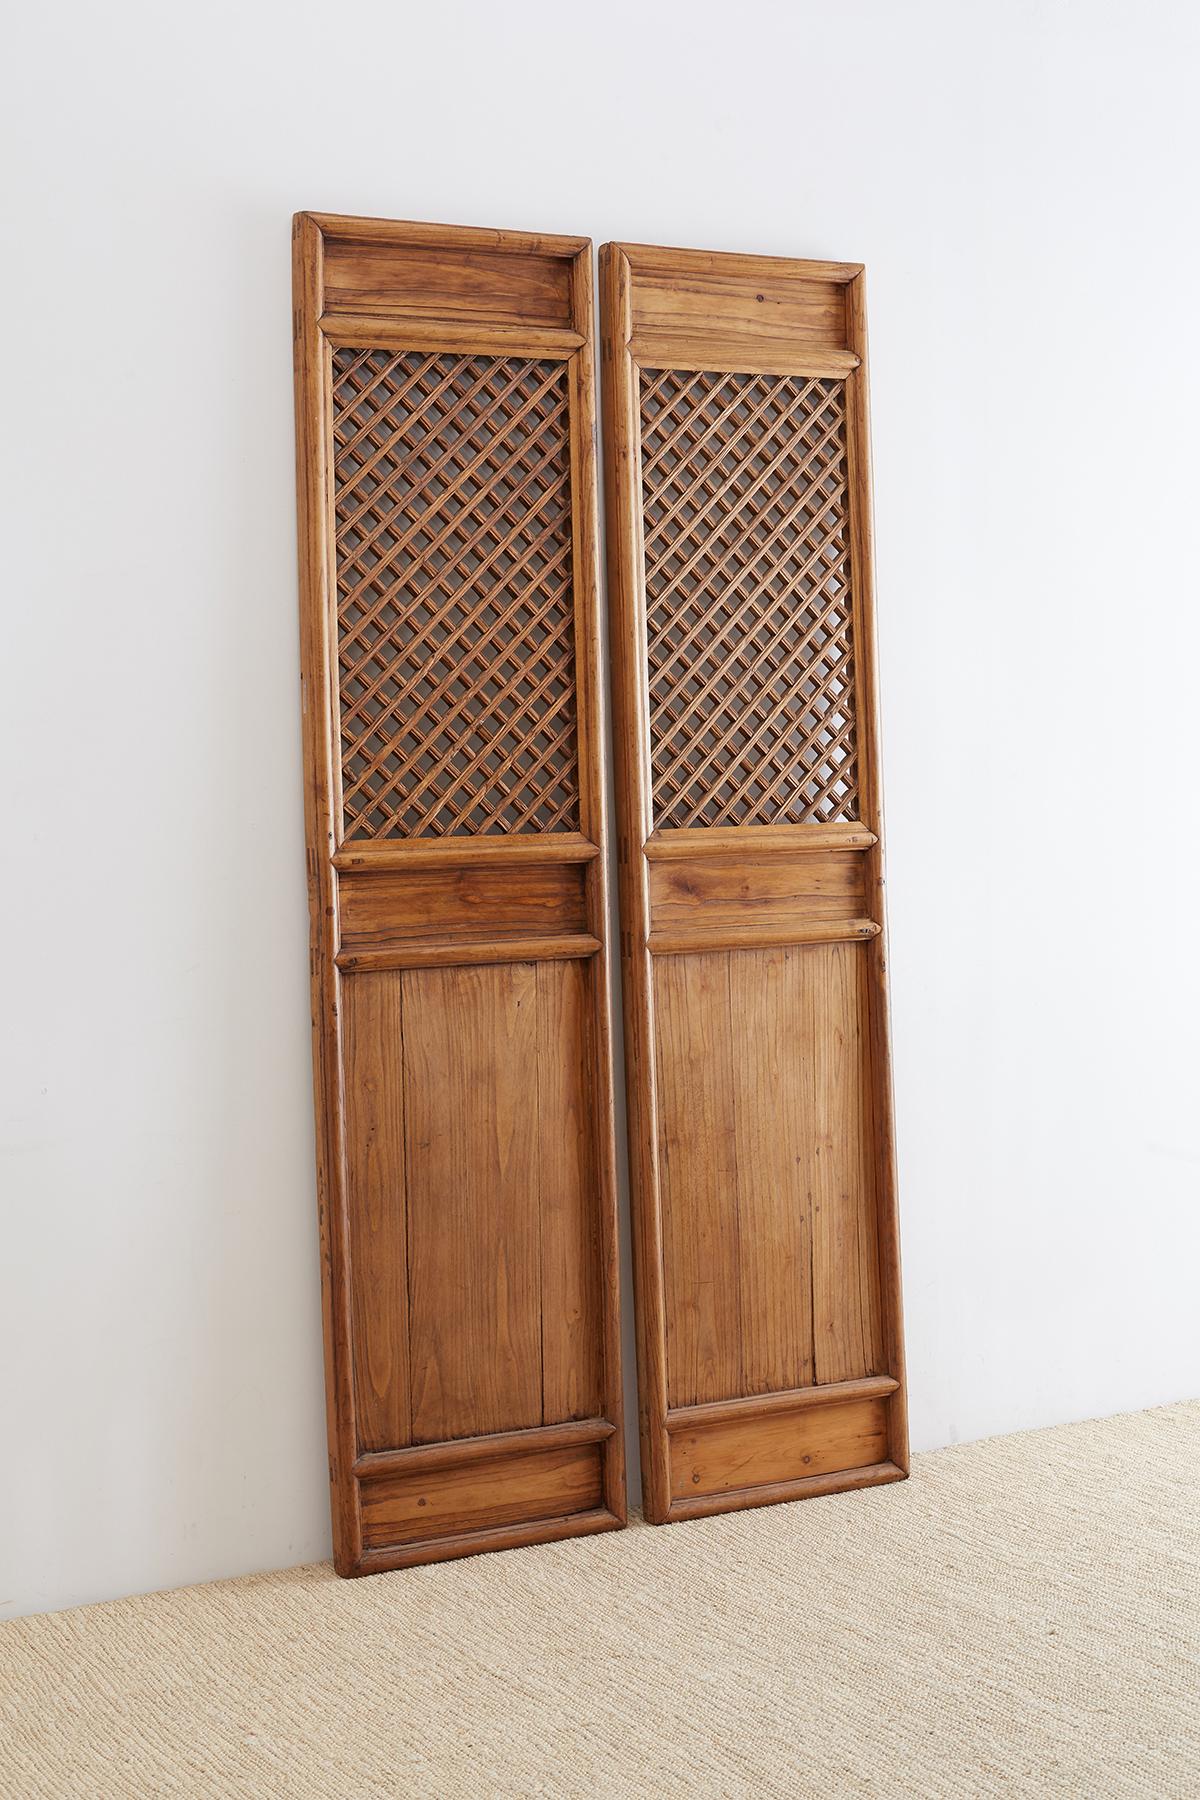 Large pair of Chinese hand carved door panels featuring lattice windows. Beautifully constructed from elm with mortise and tenon joinery. Each window has a geometric fretwork of interlocking pieces and the doors have deep recessed panels. The doors